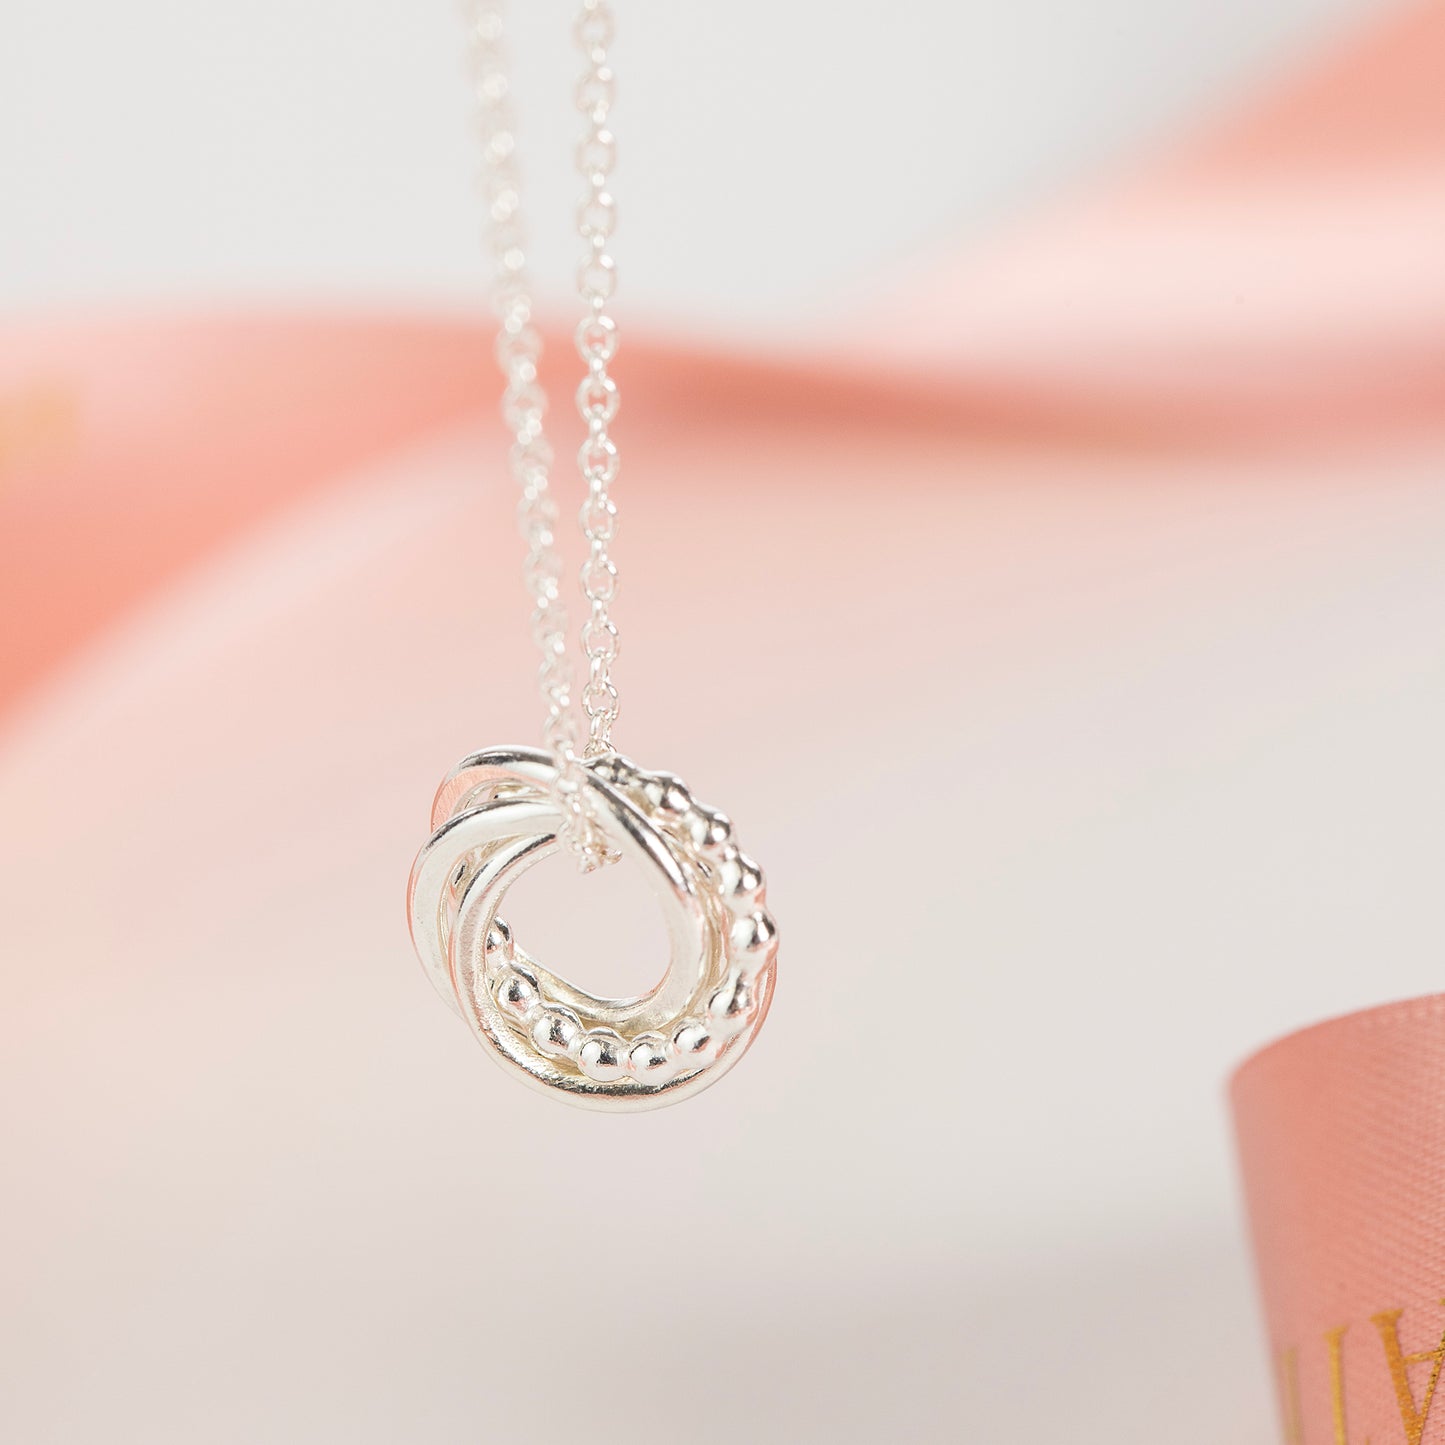 4 Friends Necklace - Silver Love Knot Necklace